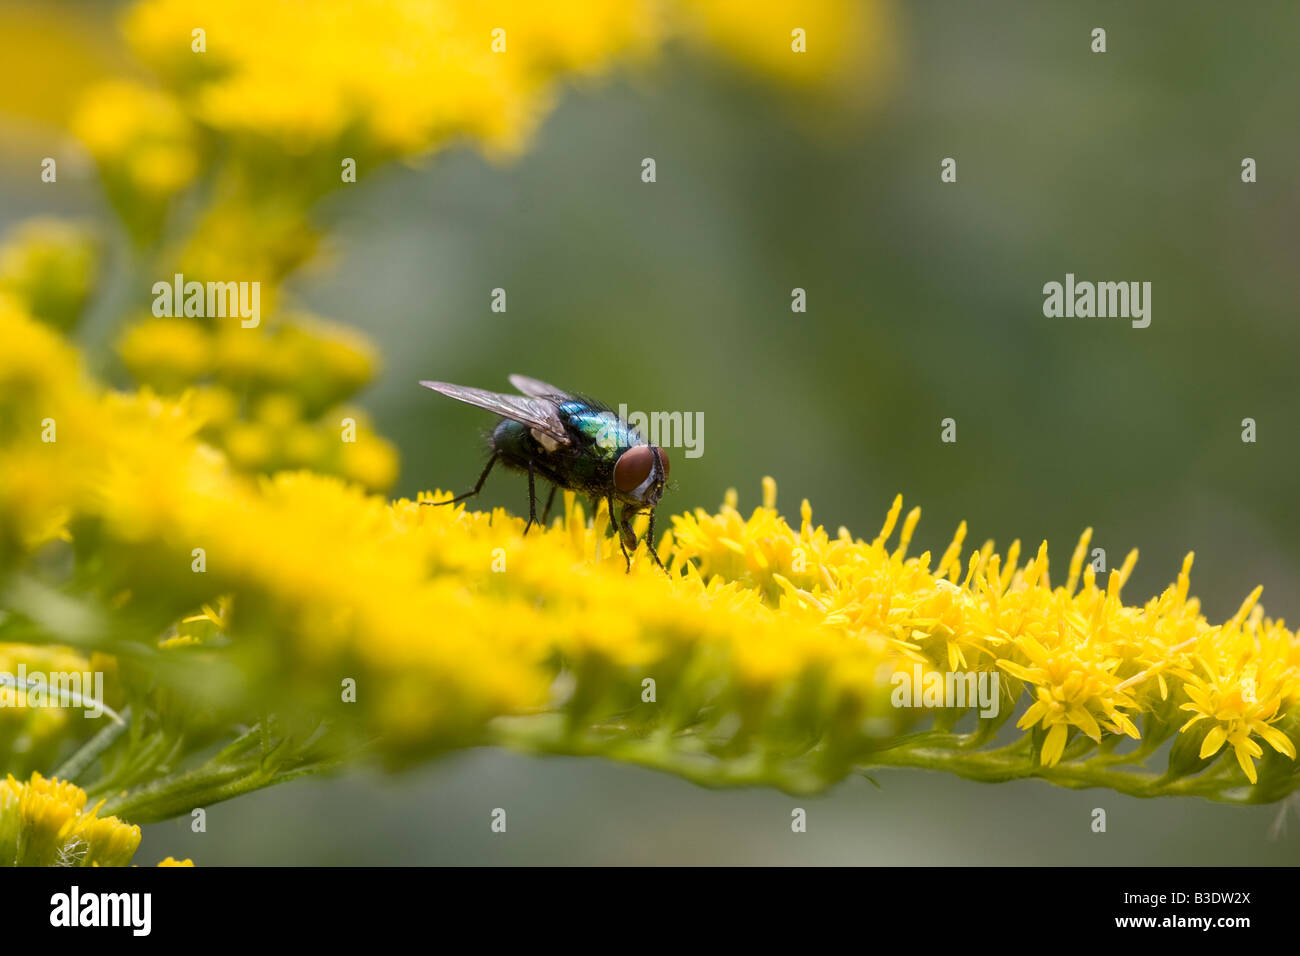 A common green bottle fly Lucilia sericata on the yellow flowers of a goldenrod solidago Stock Photo